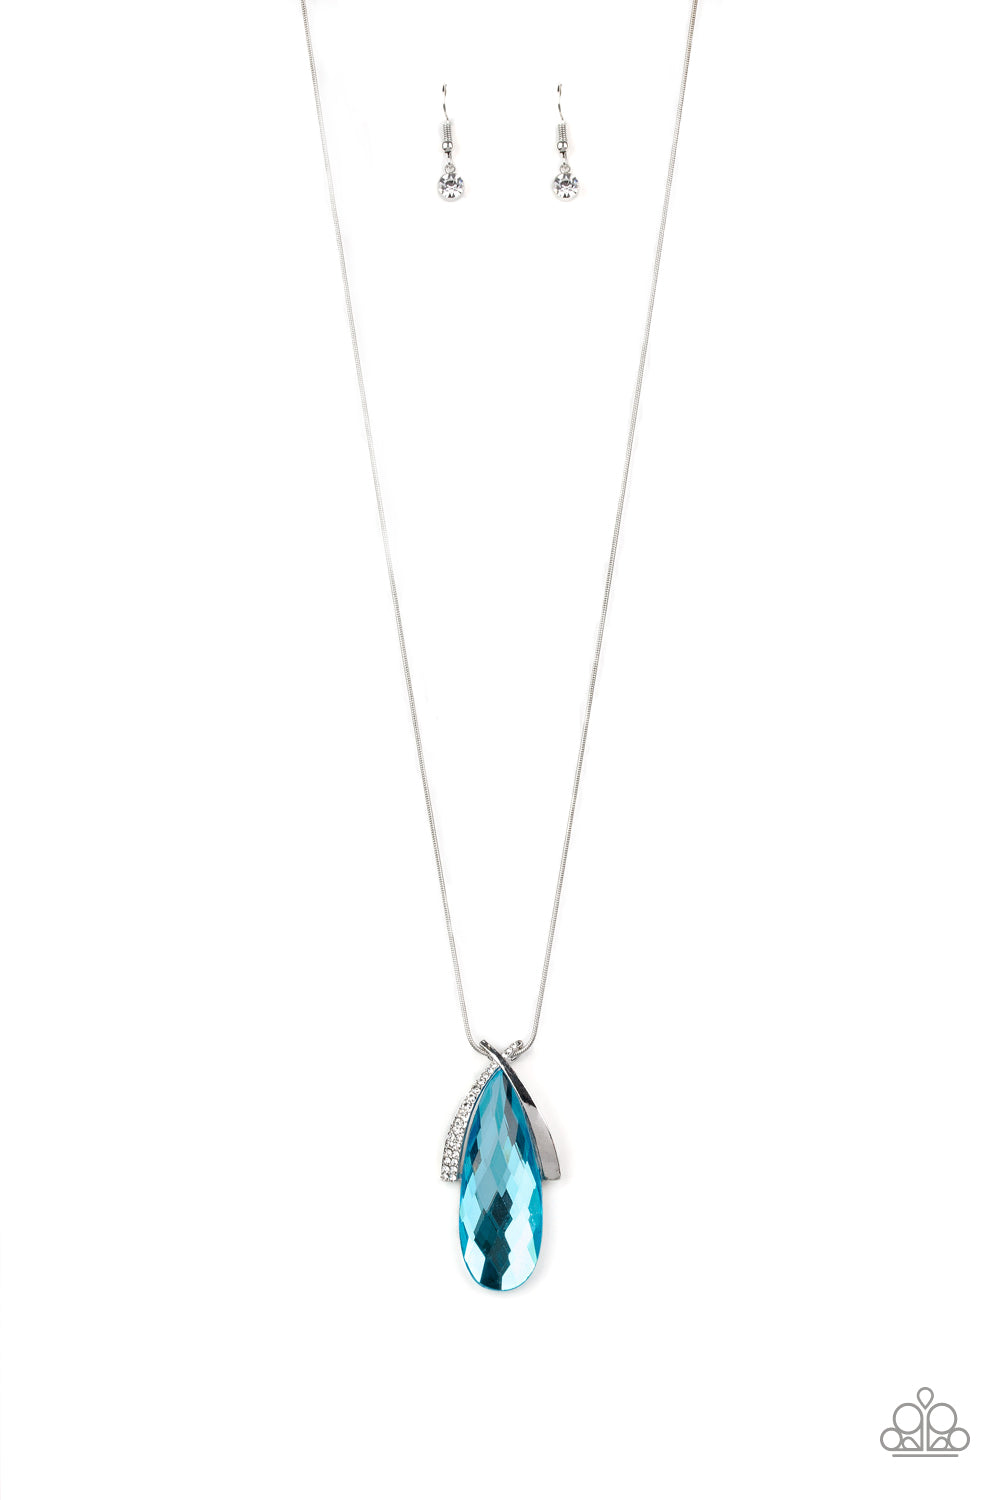 Paparazzi Stellar Sophistication - Blue Necklace - A Finishing Touch Jewelry